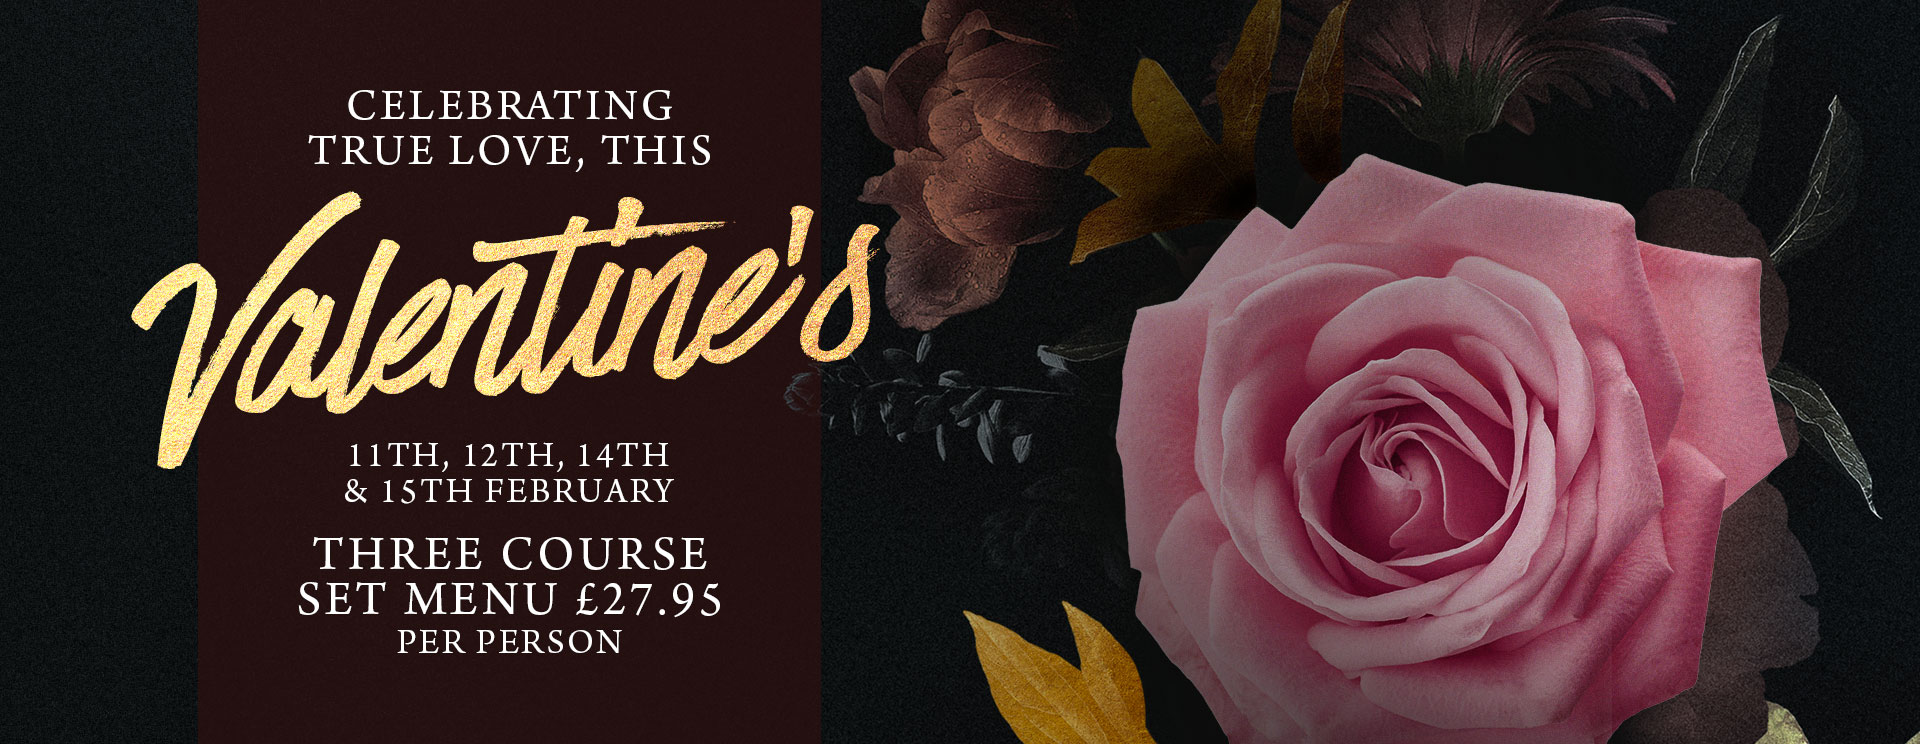 Valentines at The Whittington Arms